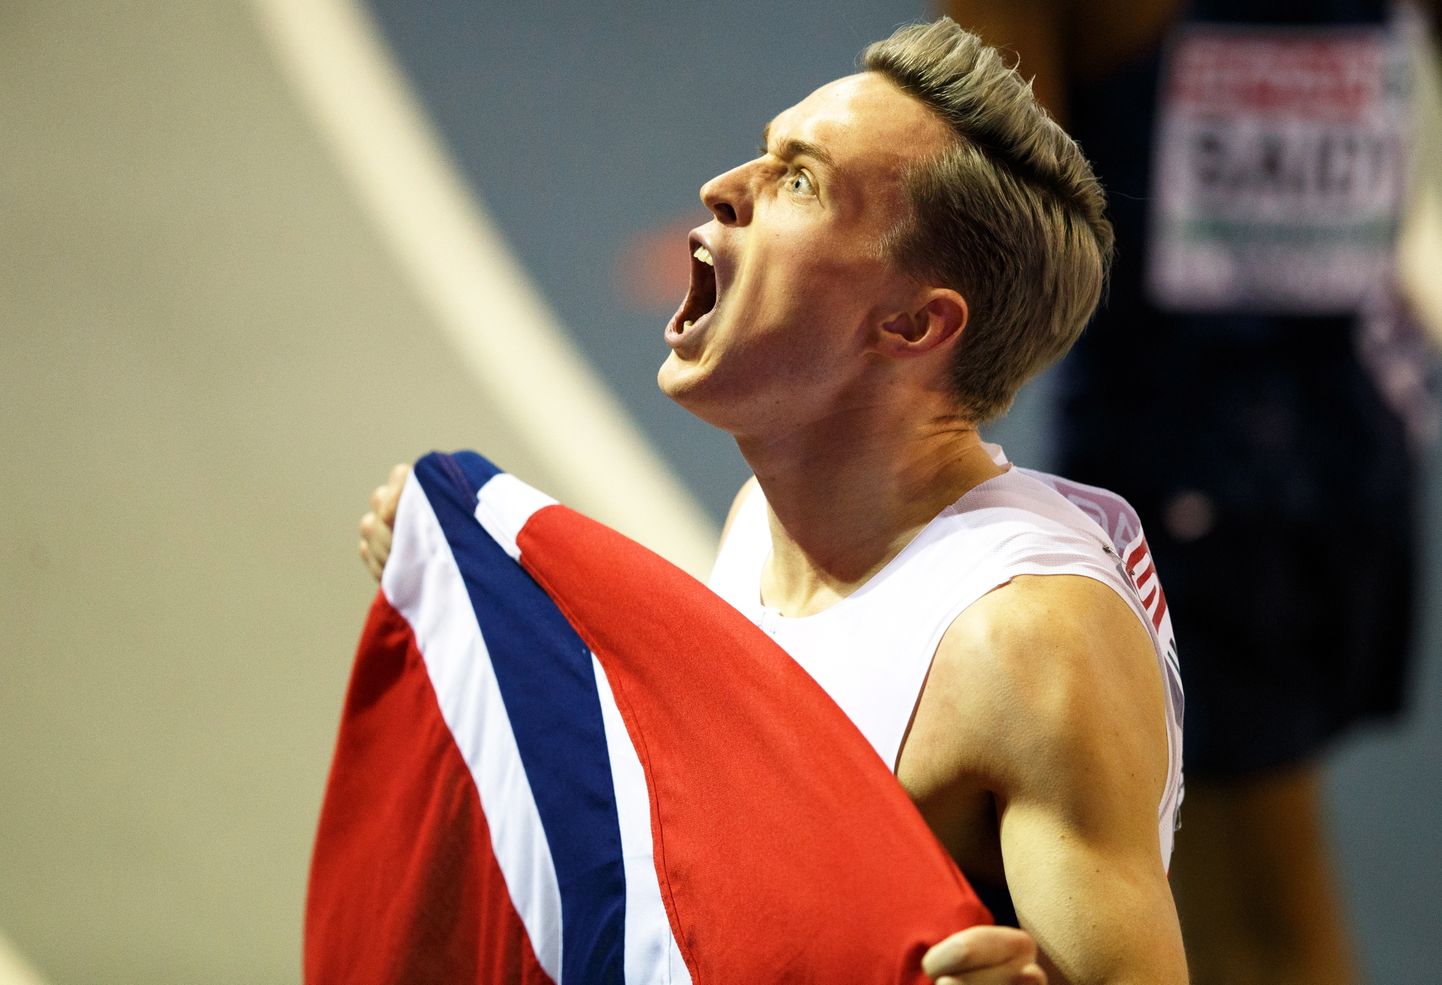 epa07409627 Karsten Warholm of Norway celebrates after winning the gold medal in the men's 400m final at the 35th European Athletics Indoor Championships in Glasgow, Britain, 02 March 2019.  EPA/ROBERT PERRY